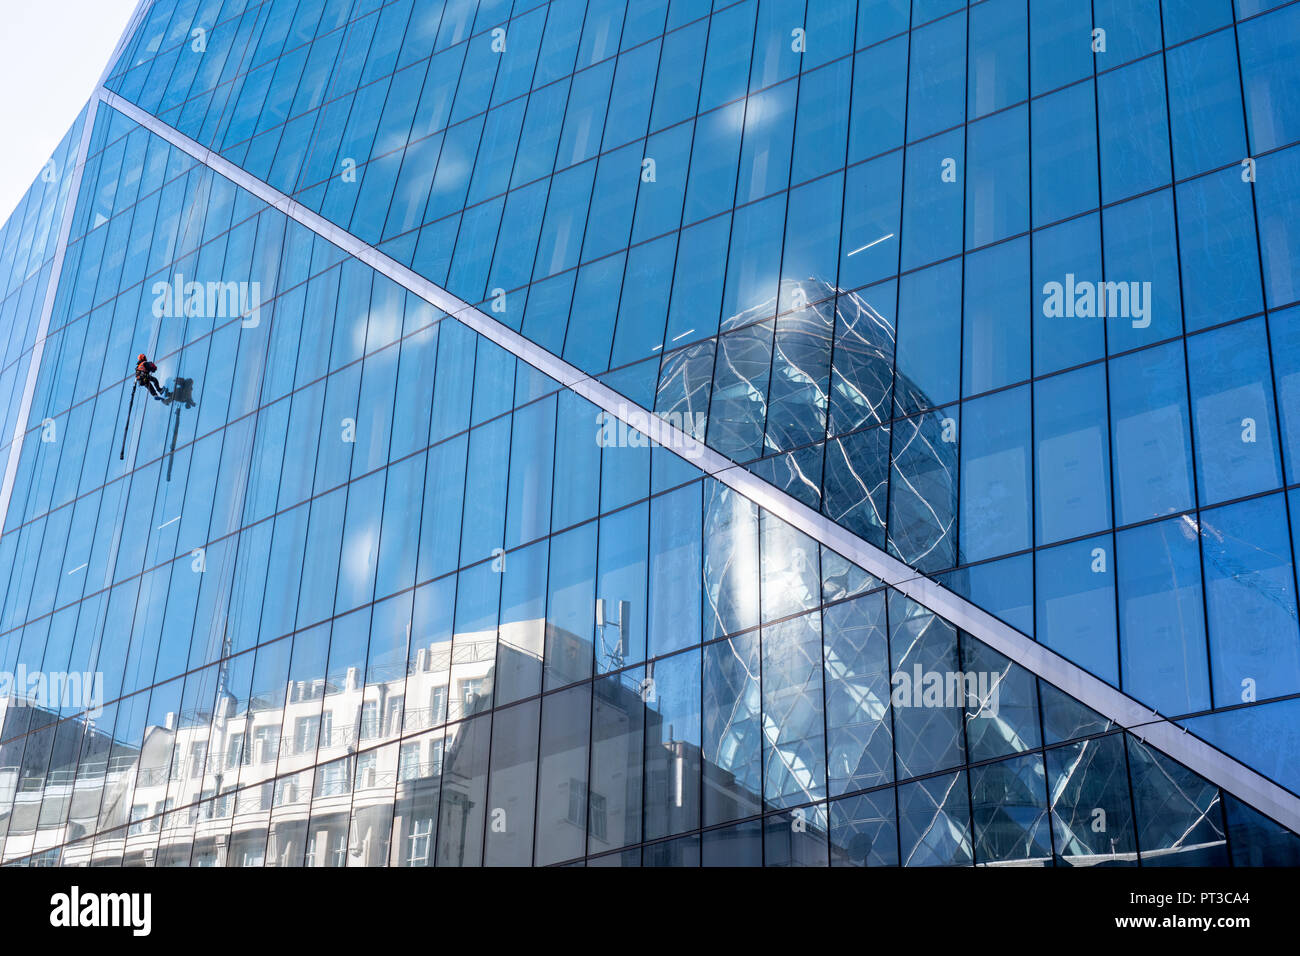 Window cleaner abseiling down an office building in London. England Stock Photo